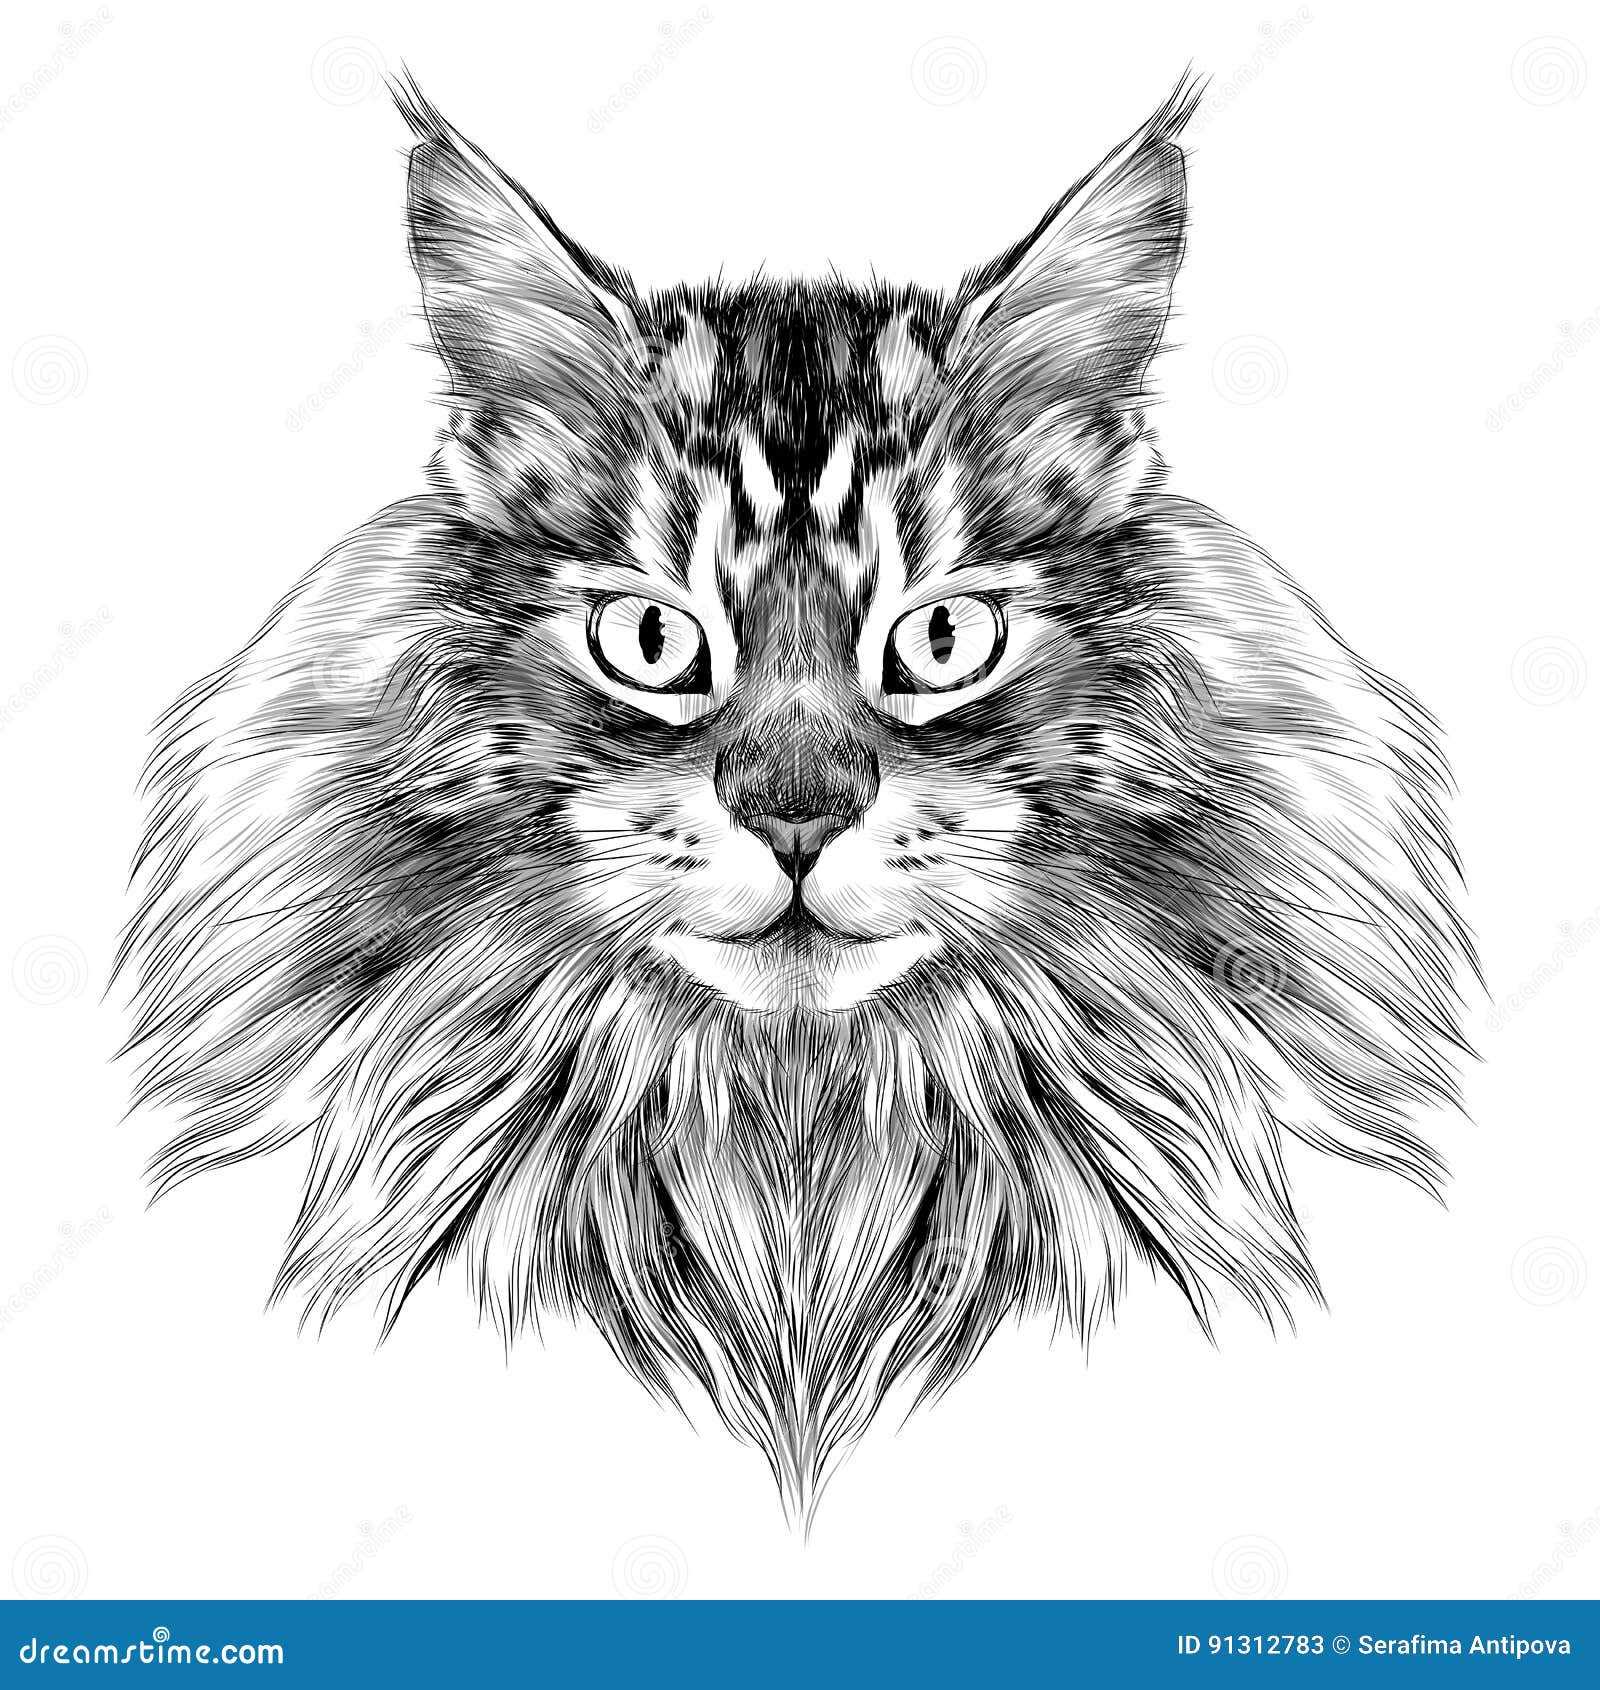 8 Easy Steps To Draw A Maine Coon Cat  Maine Coon Central